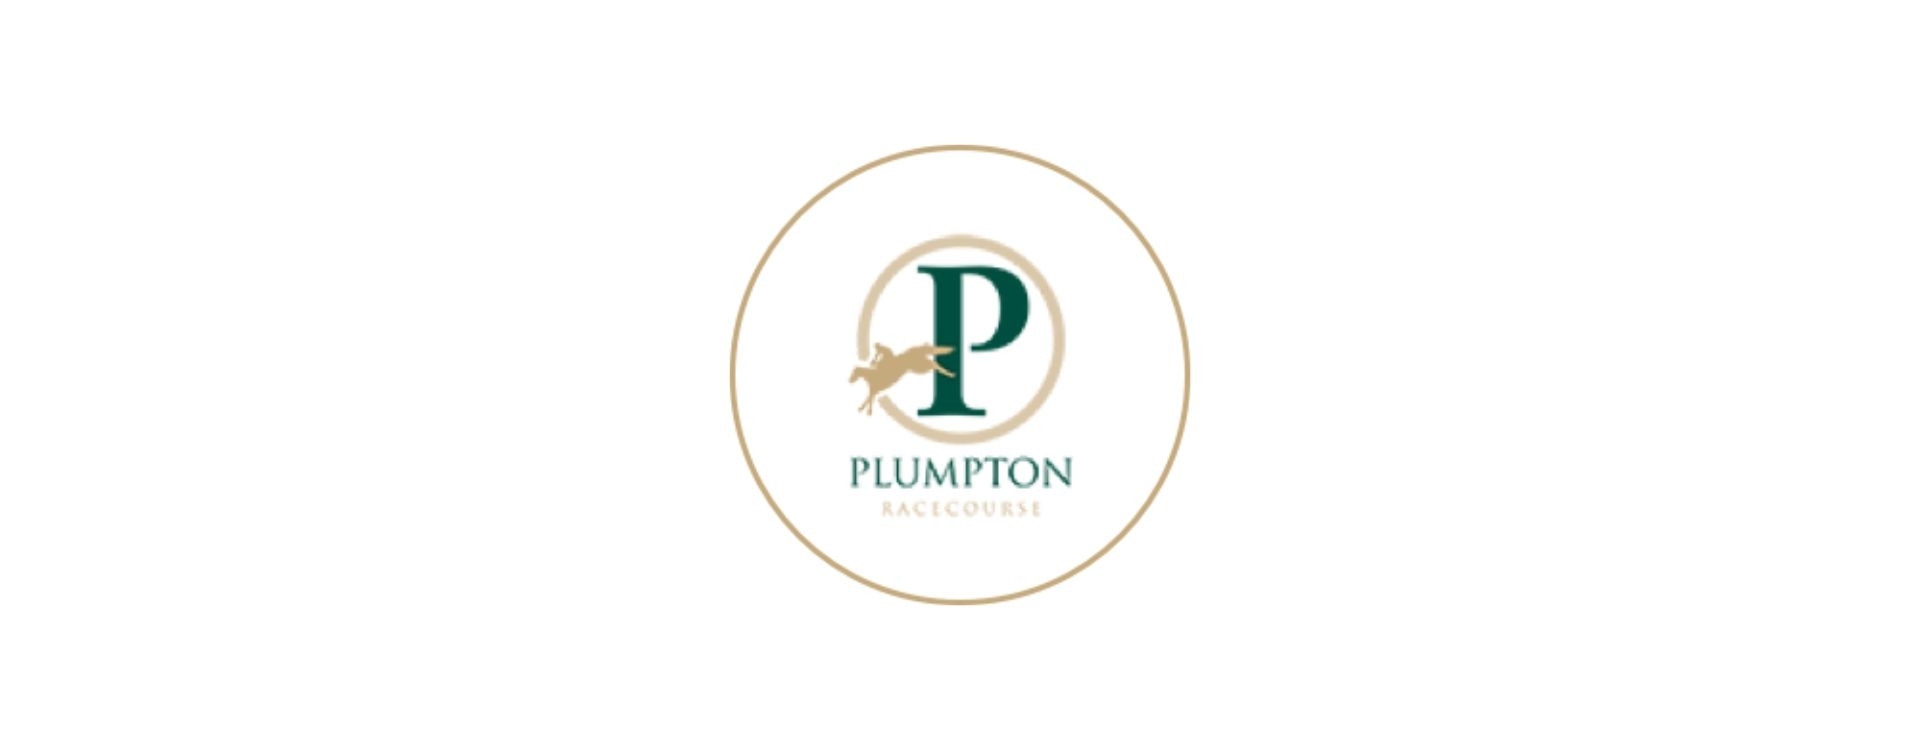 Get ready to jingle all the way to our festive racedays at Plumpton!